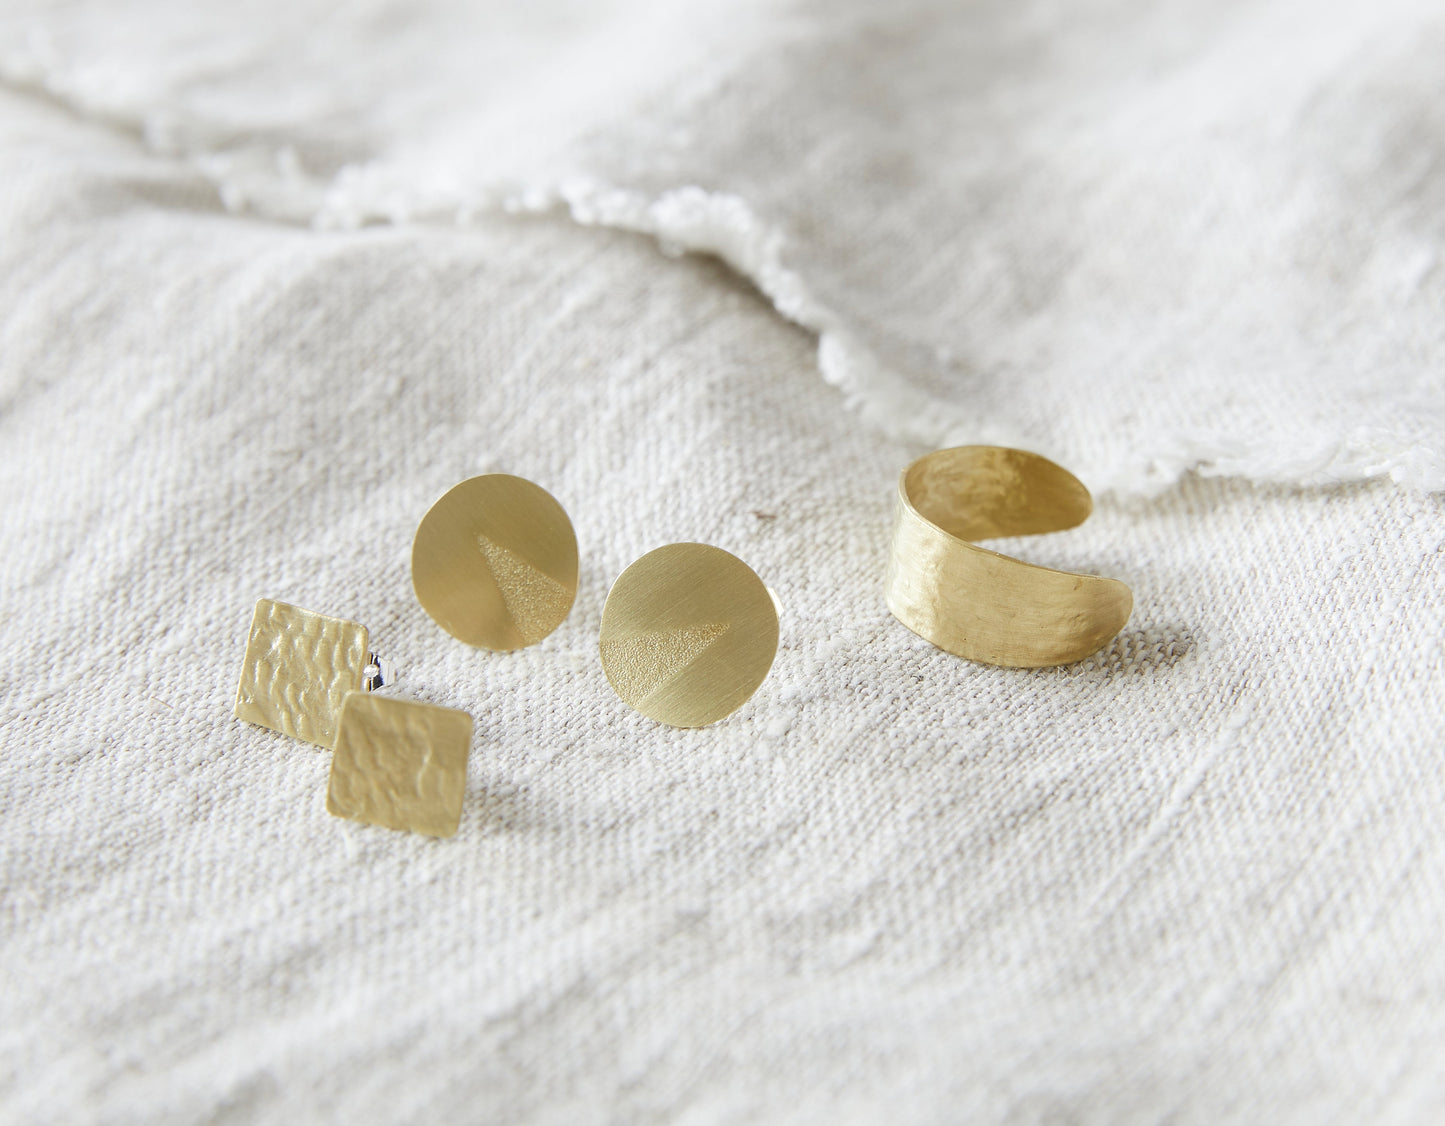 Lifestyle shot of square stud earrings, round stud earrings and the textured ring all resting on natural linen fabric.